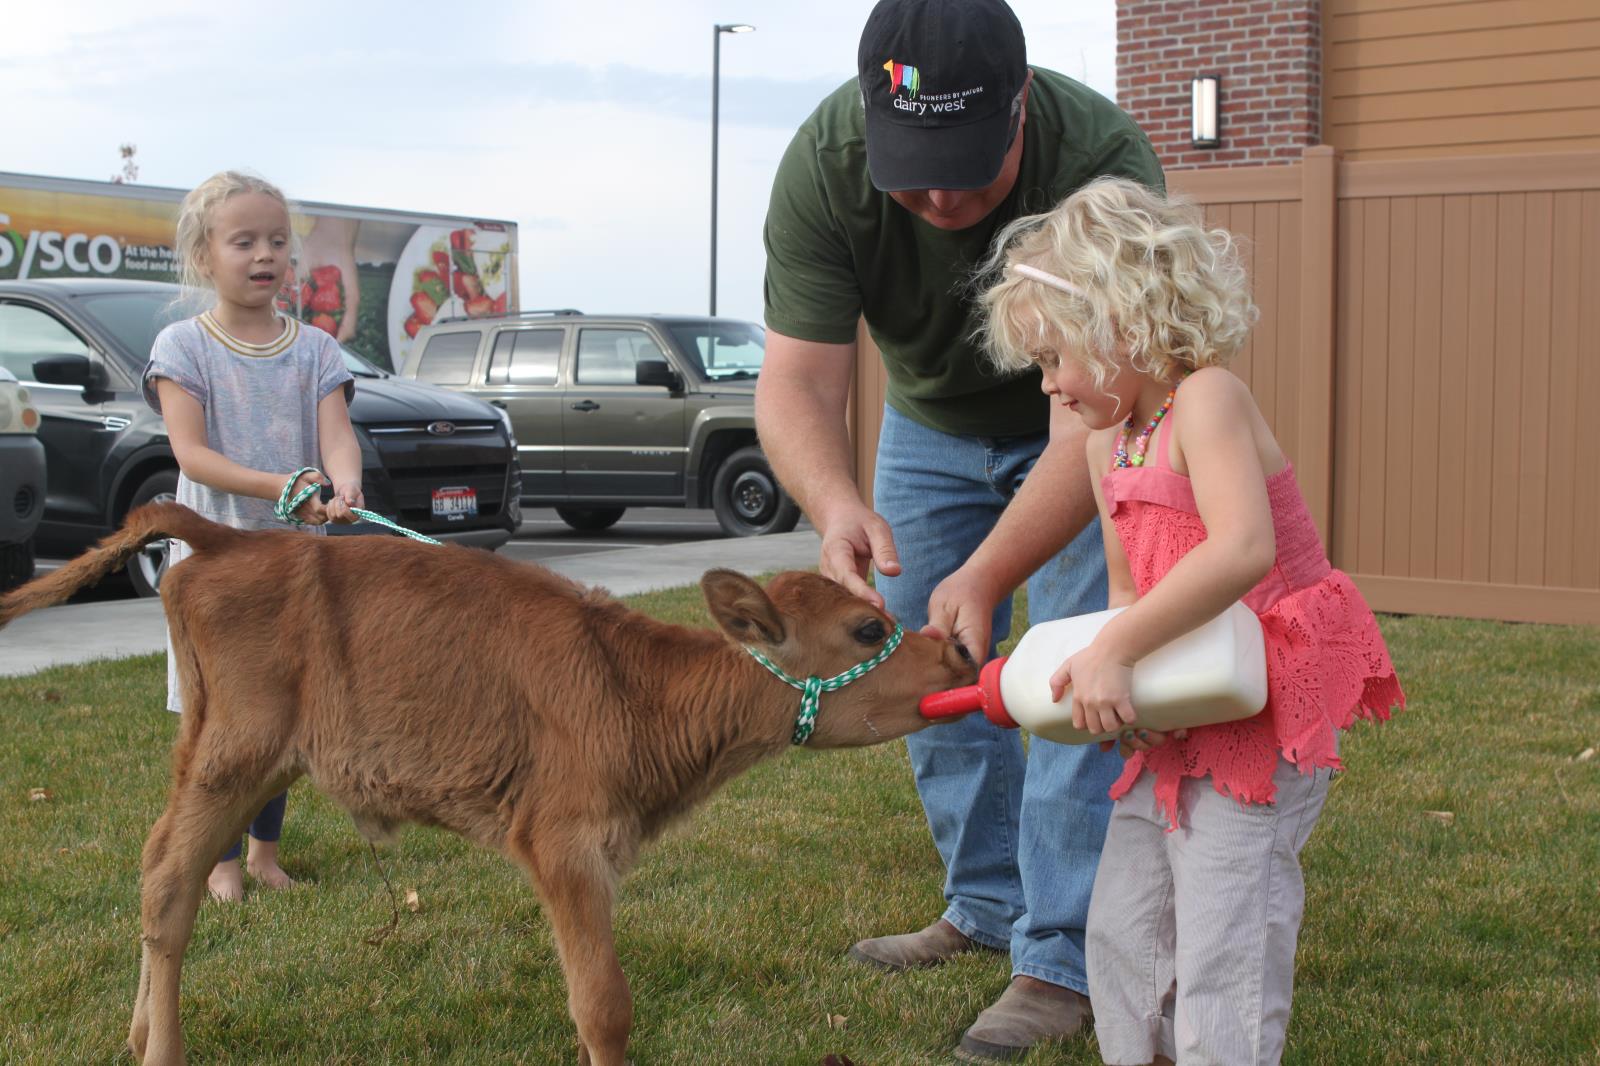 Meridian dairyman Clint Jackson helps a girl feed a calf Oct. 24 at Smoky Mountain Pizzeria Grill in Kuna.